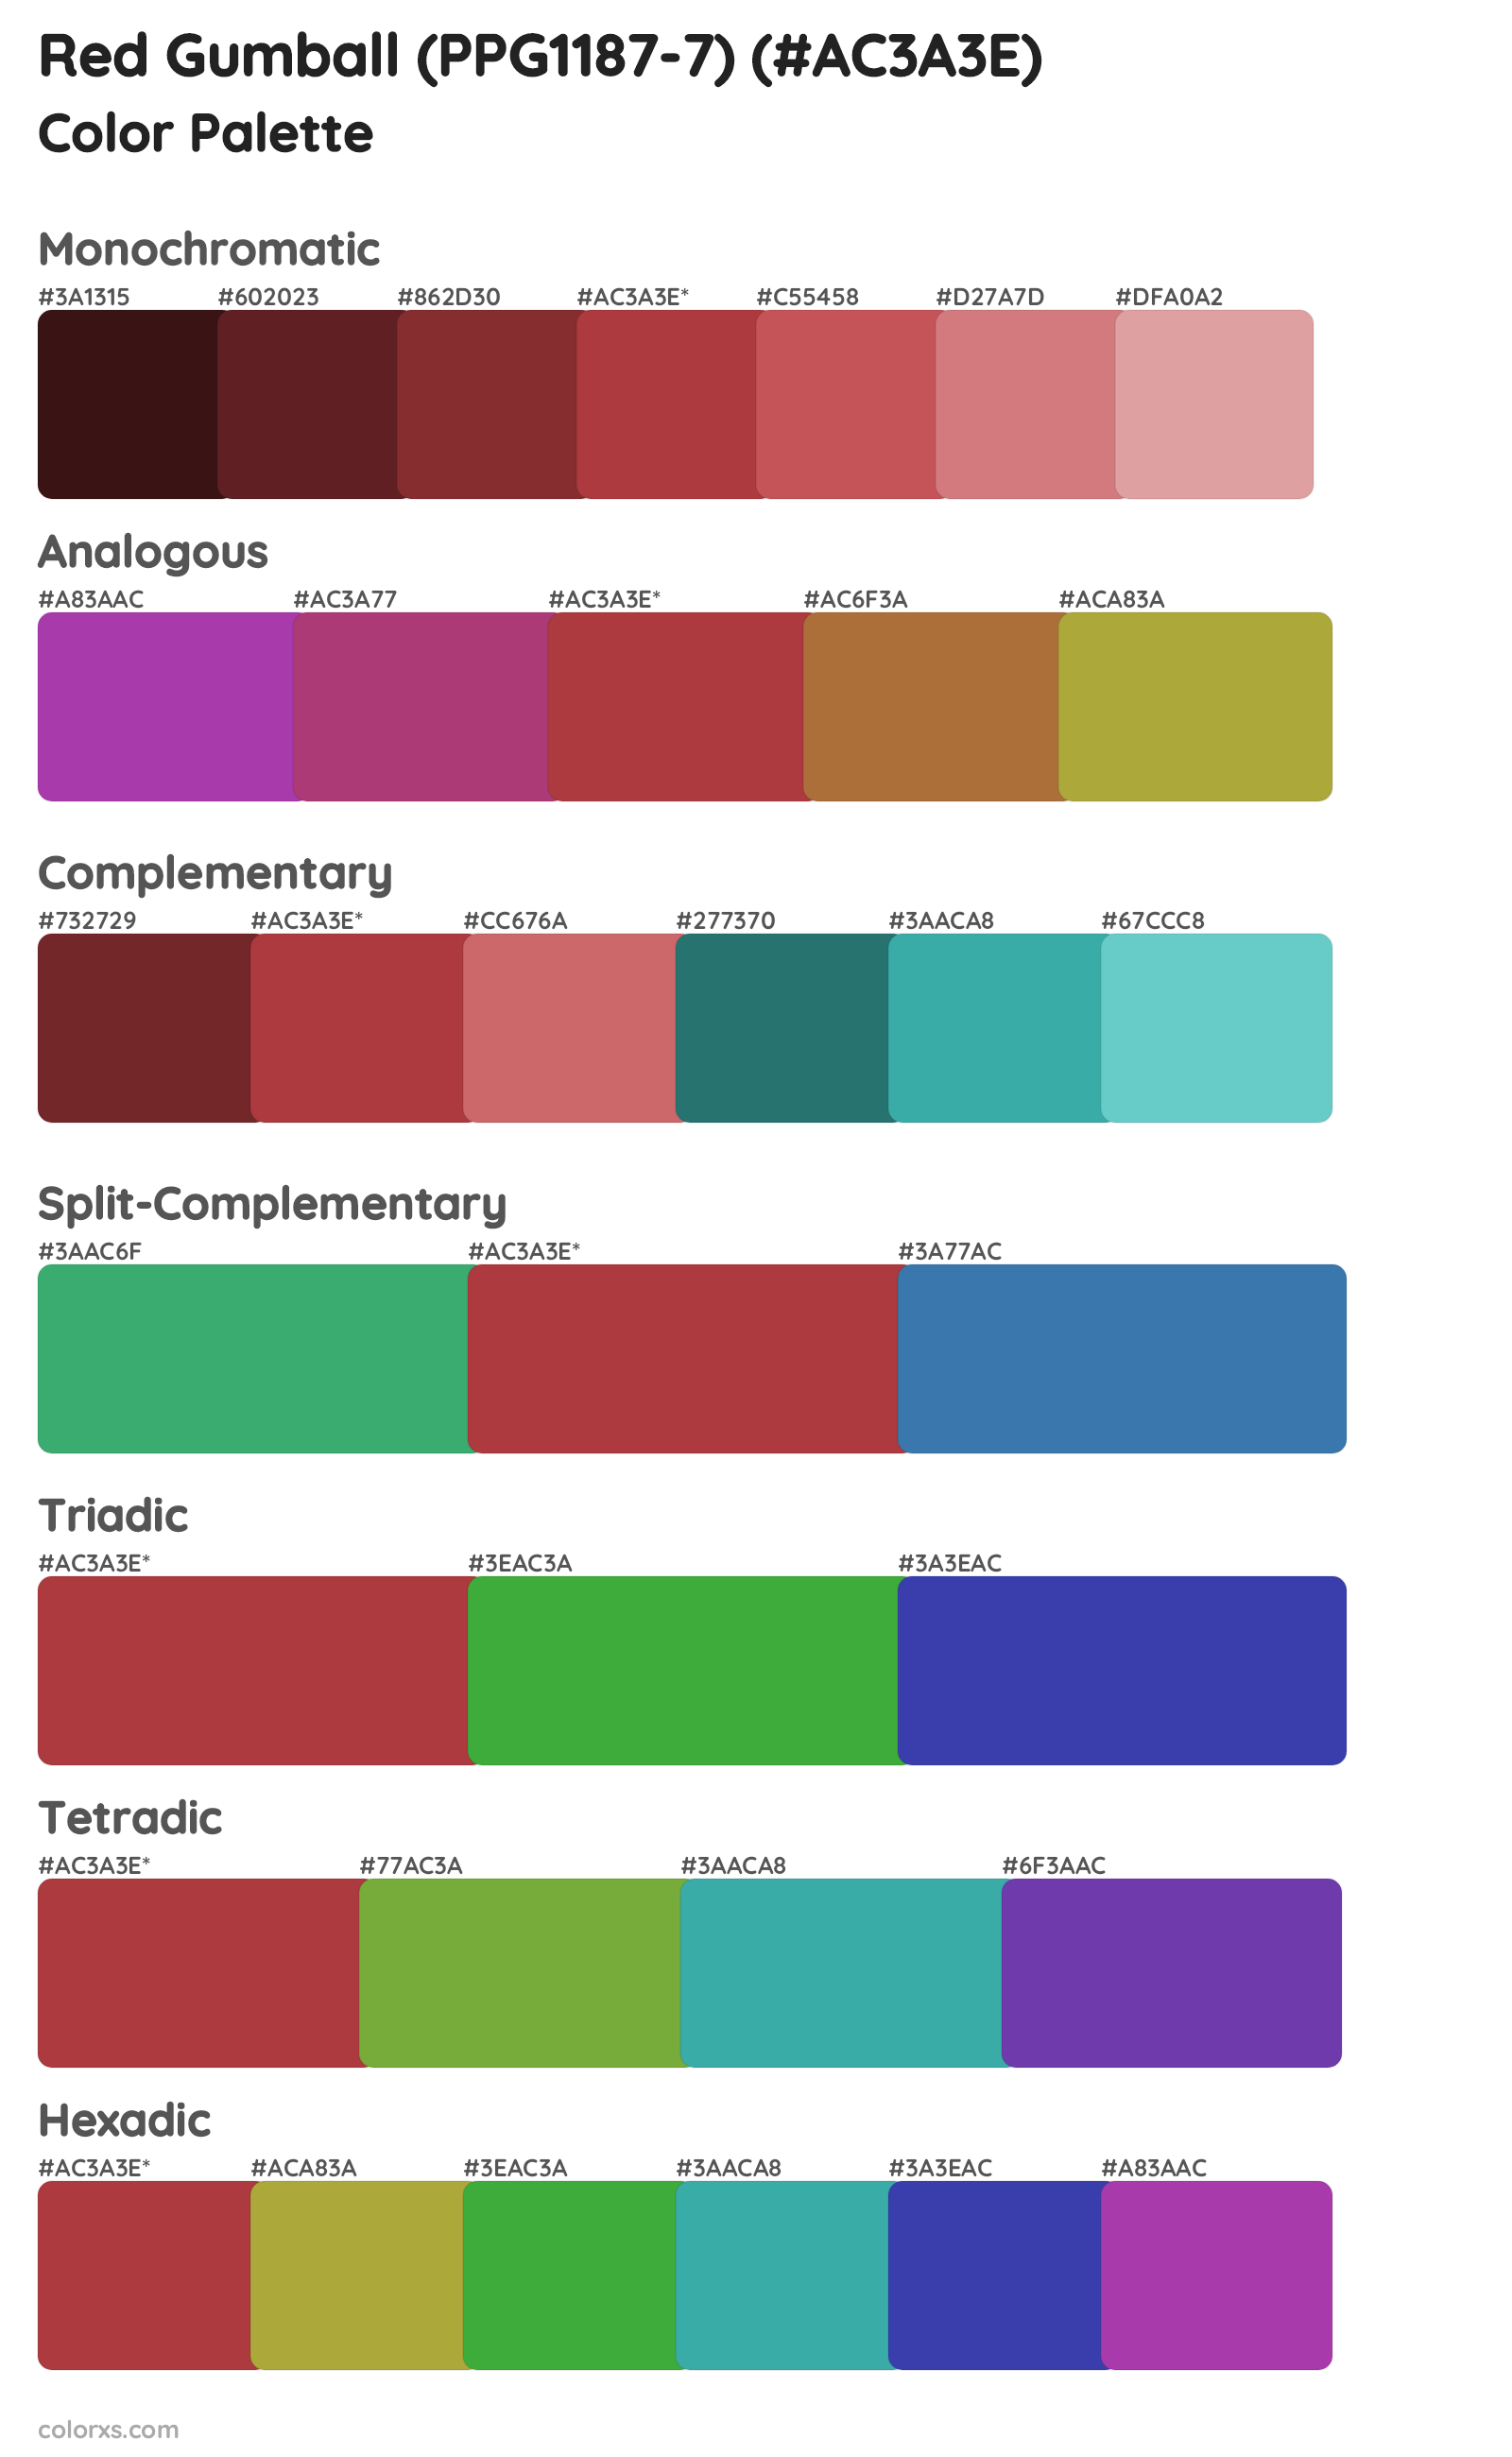 Red Gumball (PPG1187-7) Color Scheme Palettes